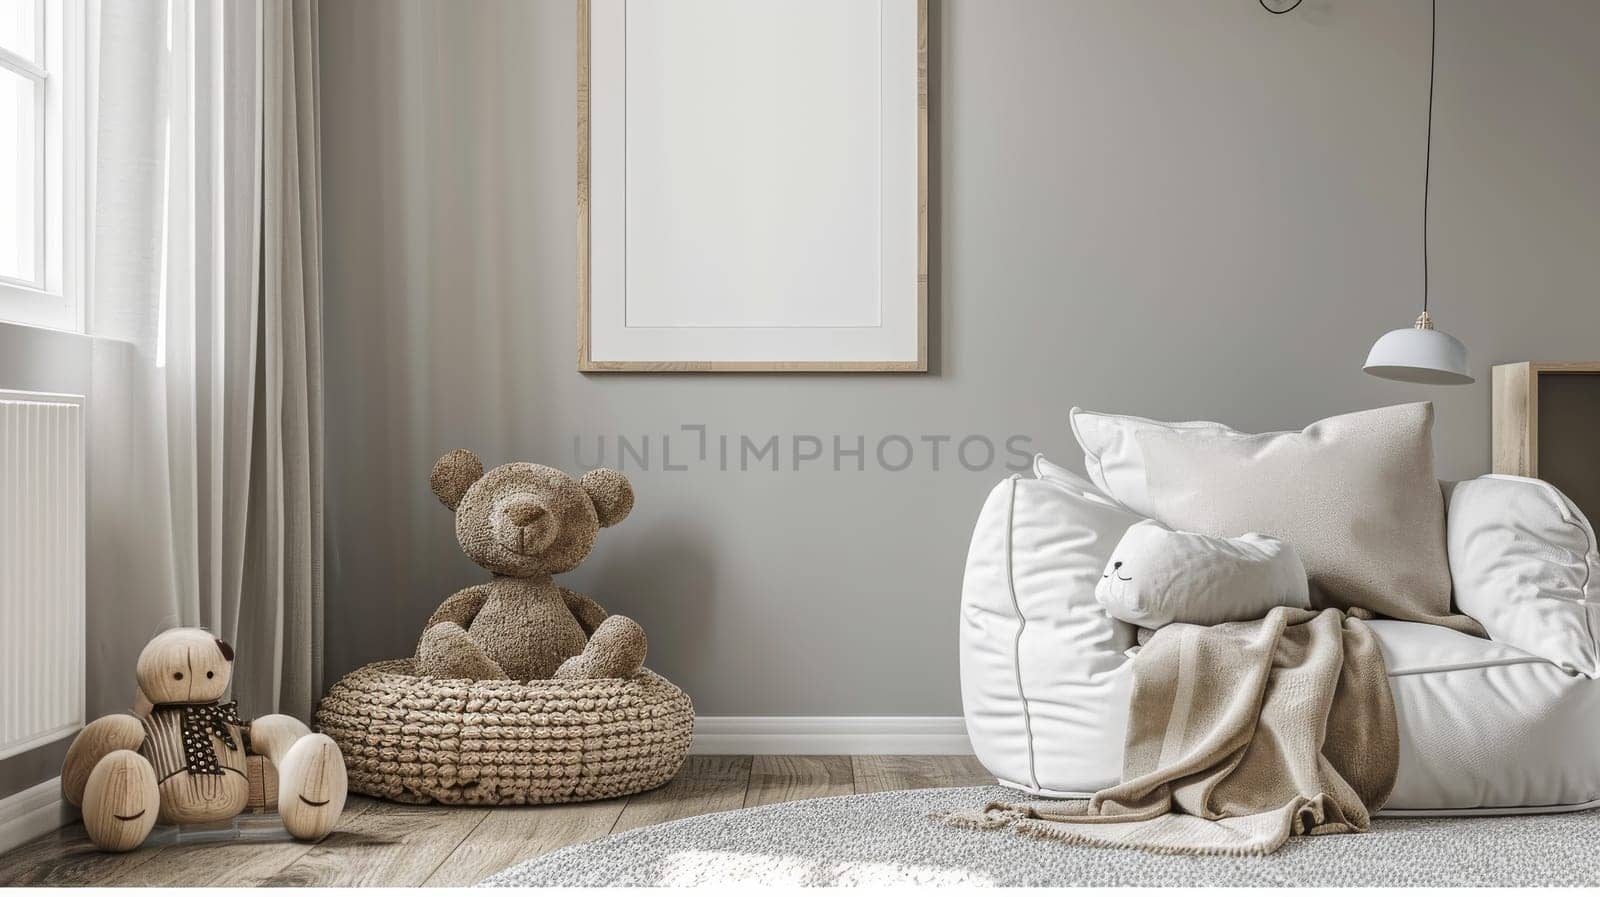 A living room with a white couch and a teddy bear on a rug by itchaznong